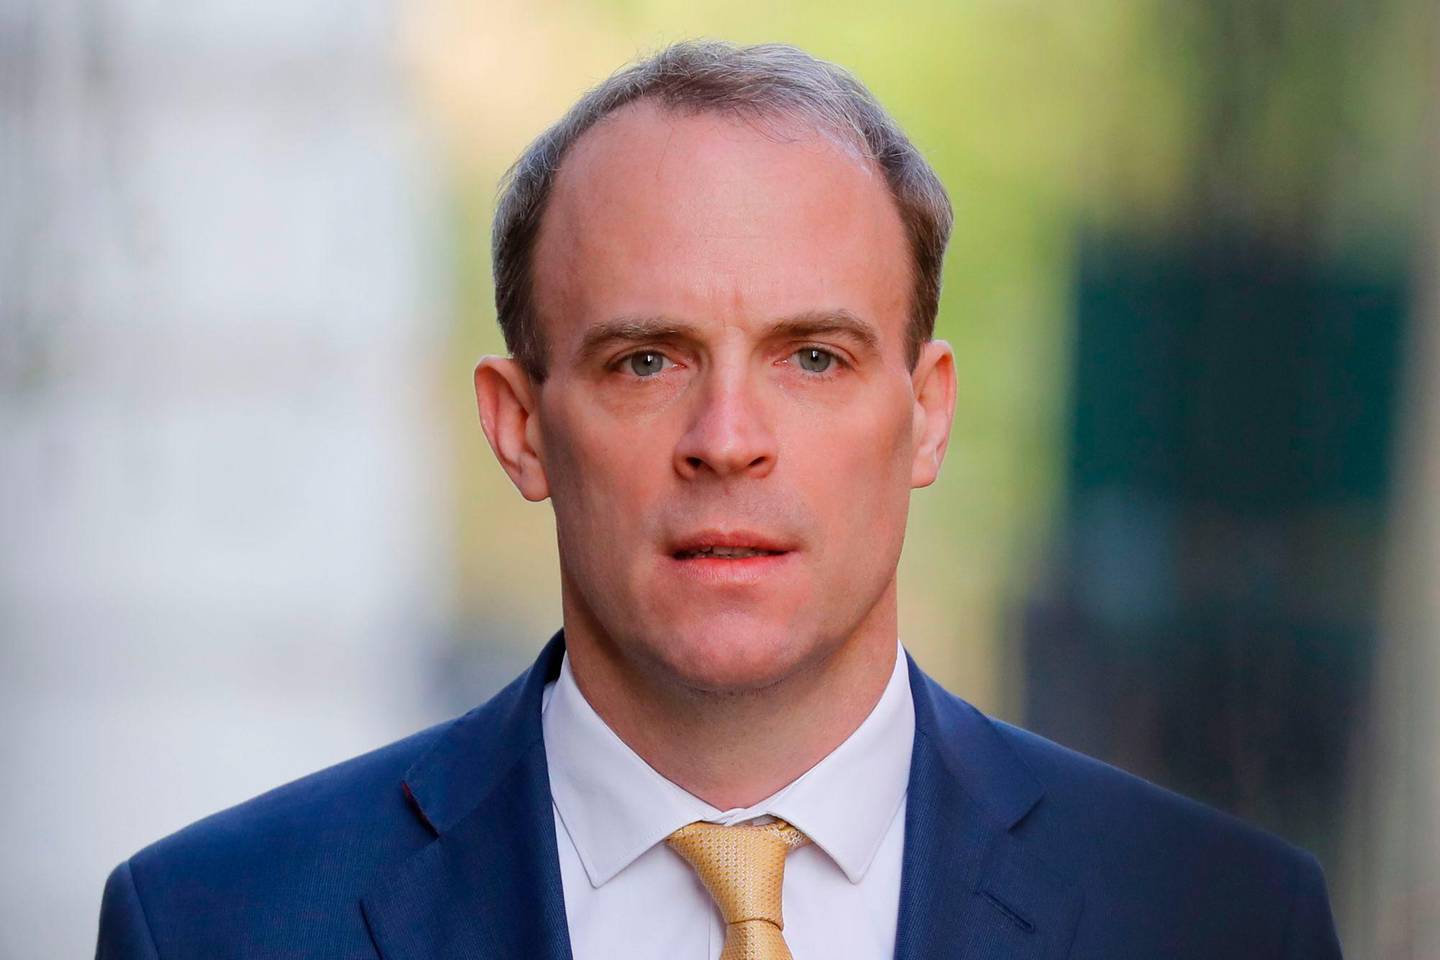 Britain's Foreign Secretary Dominic Raab arrives in Downing Street in central London on April 7, 2020 after the prime minister was moved to intensive care with a worsening case of of COVID-19. - The British prime minister spent the night in intensive care after being admitted with a deteriorating case of coronavirus, prompting serious concerns on Tuesday about his health and the government's response to a still-escalating outbreak. The prime minister asked Foreign Secretary Dominic Raab to deputise for him shortly before he was moved to the intensive care unit of London's St Thomas' Hospital on Monday evening. (Photo by Tolga AKMEN / AFP)